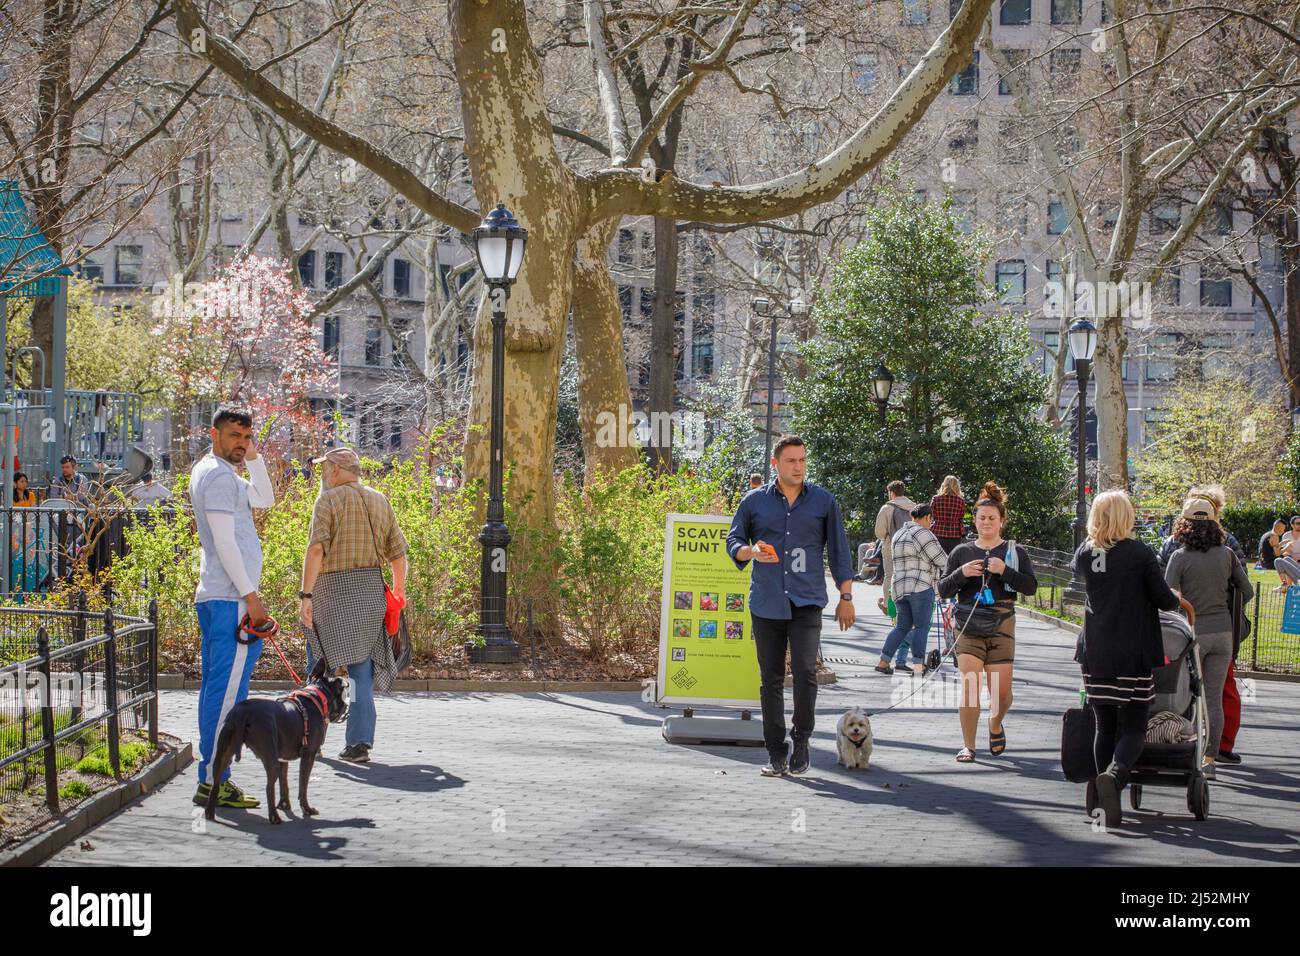 Families and children play, walk dogs, in Madison Square Park, New York, NY, USA. Stock Photo